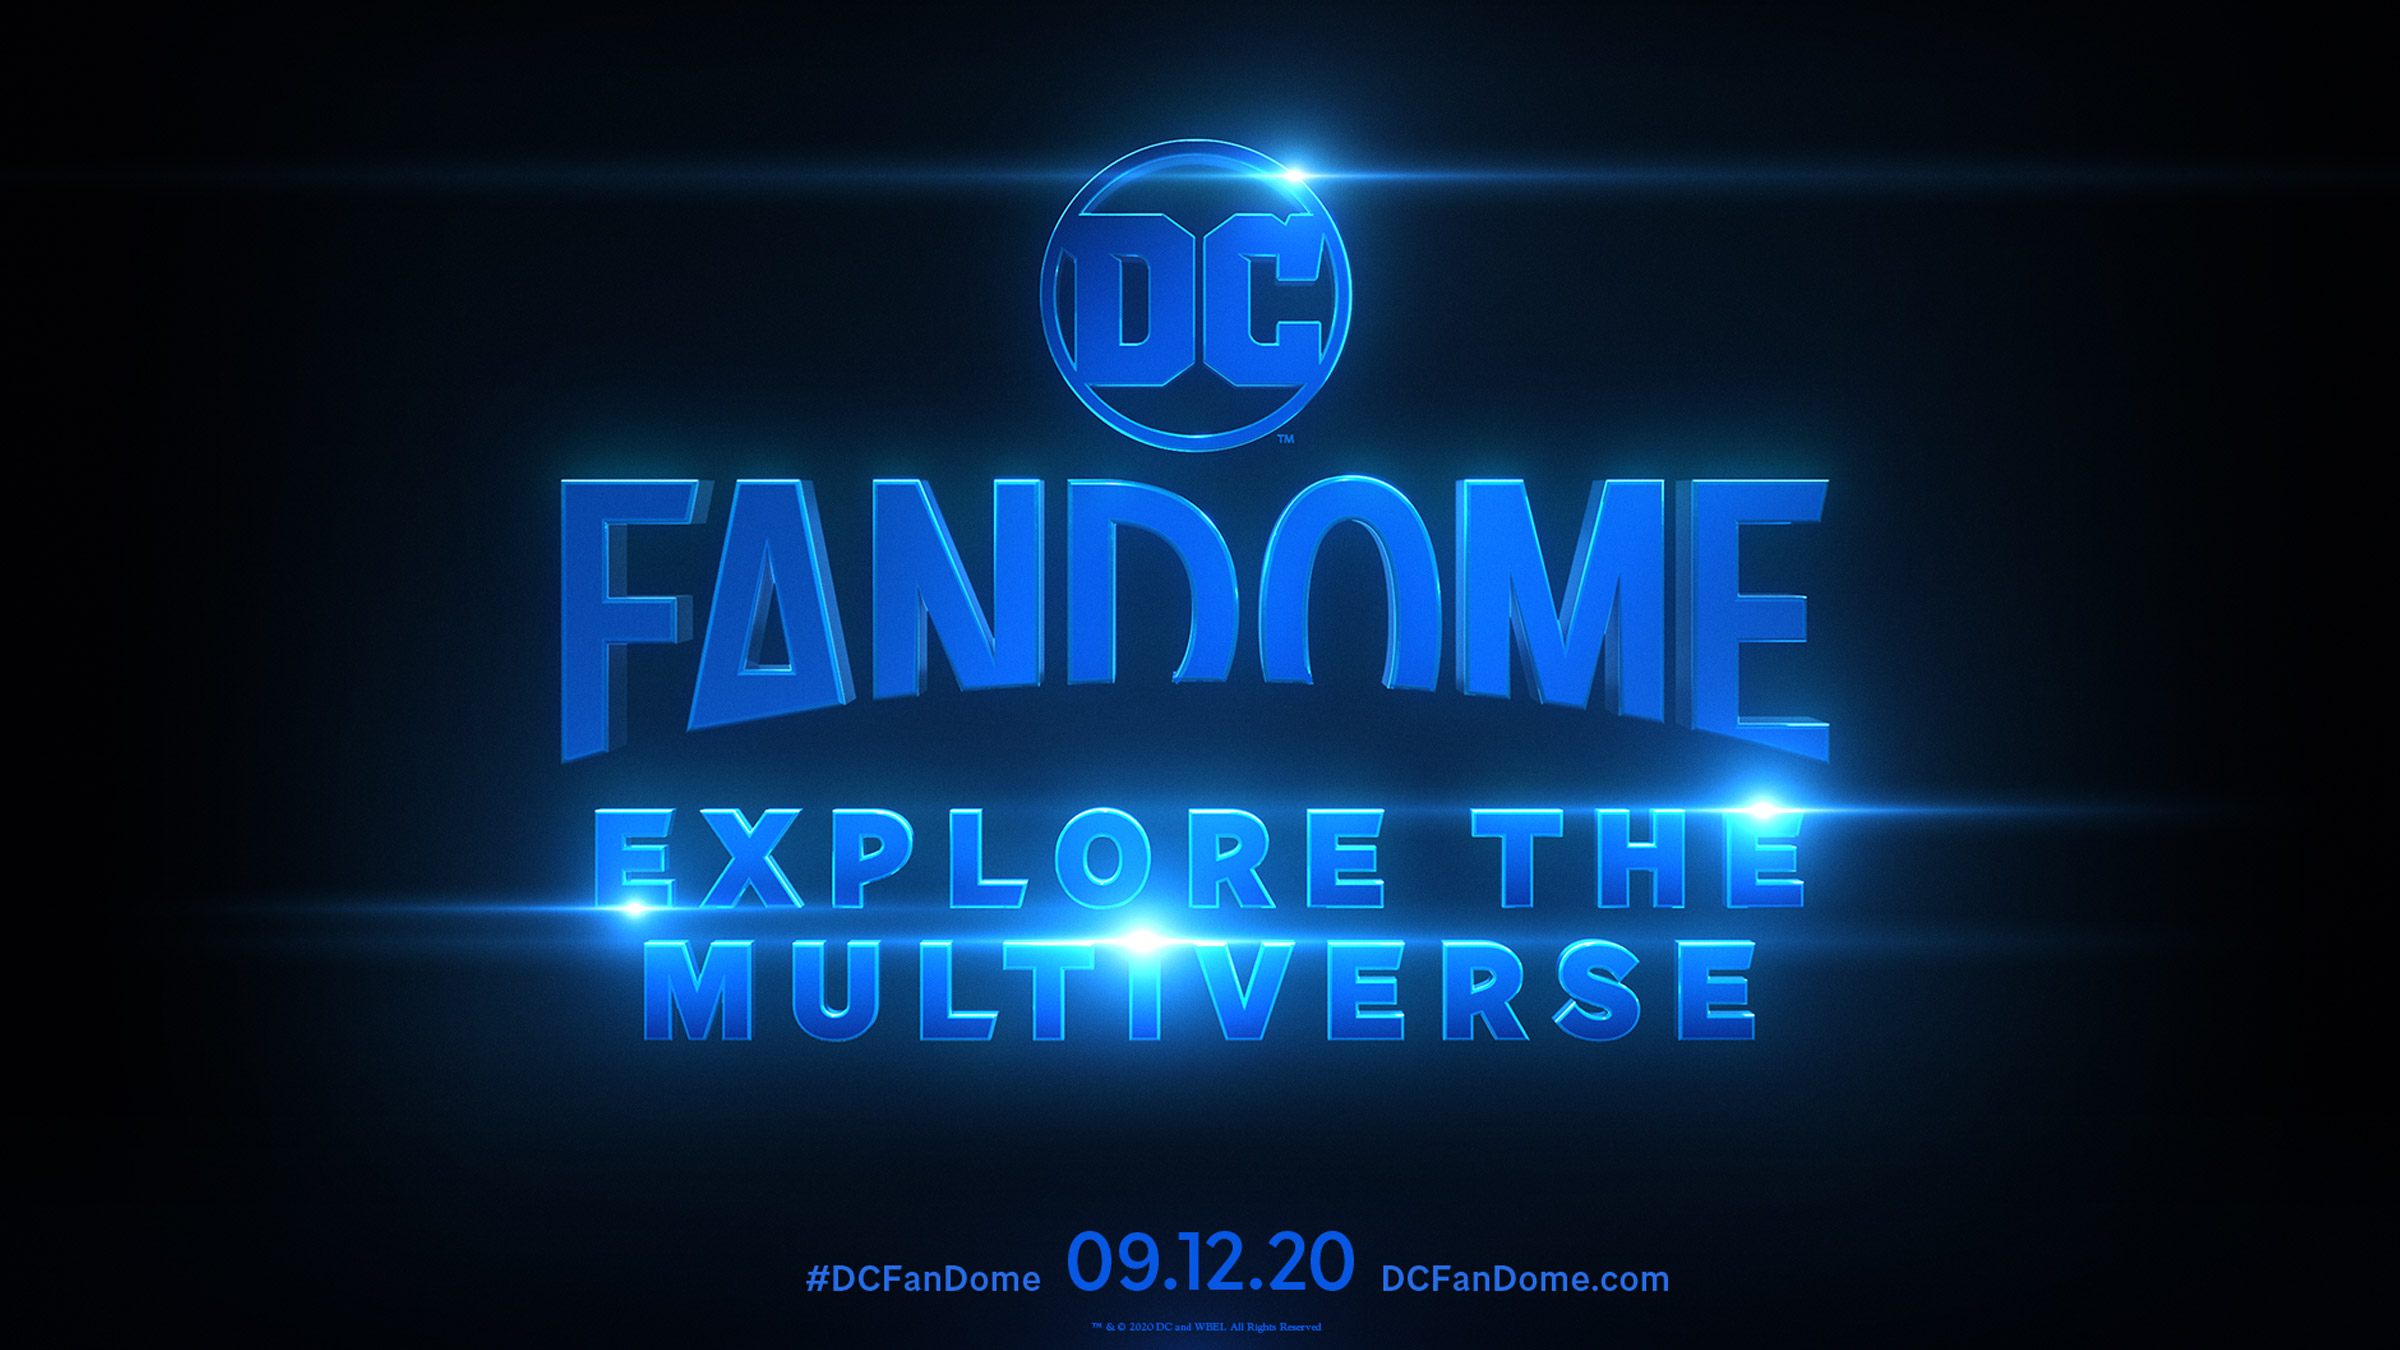 Exciting Trailer For DC FanDome Explore The Multiverse